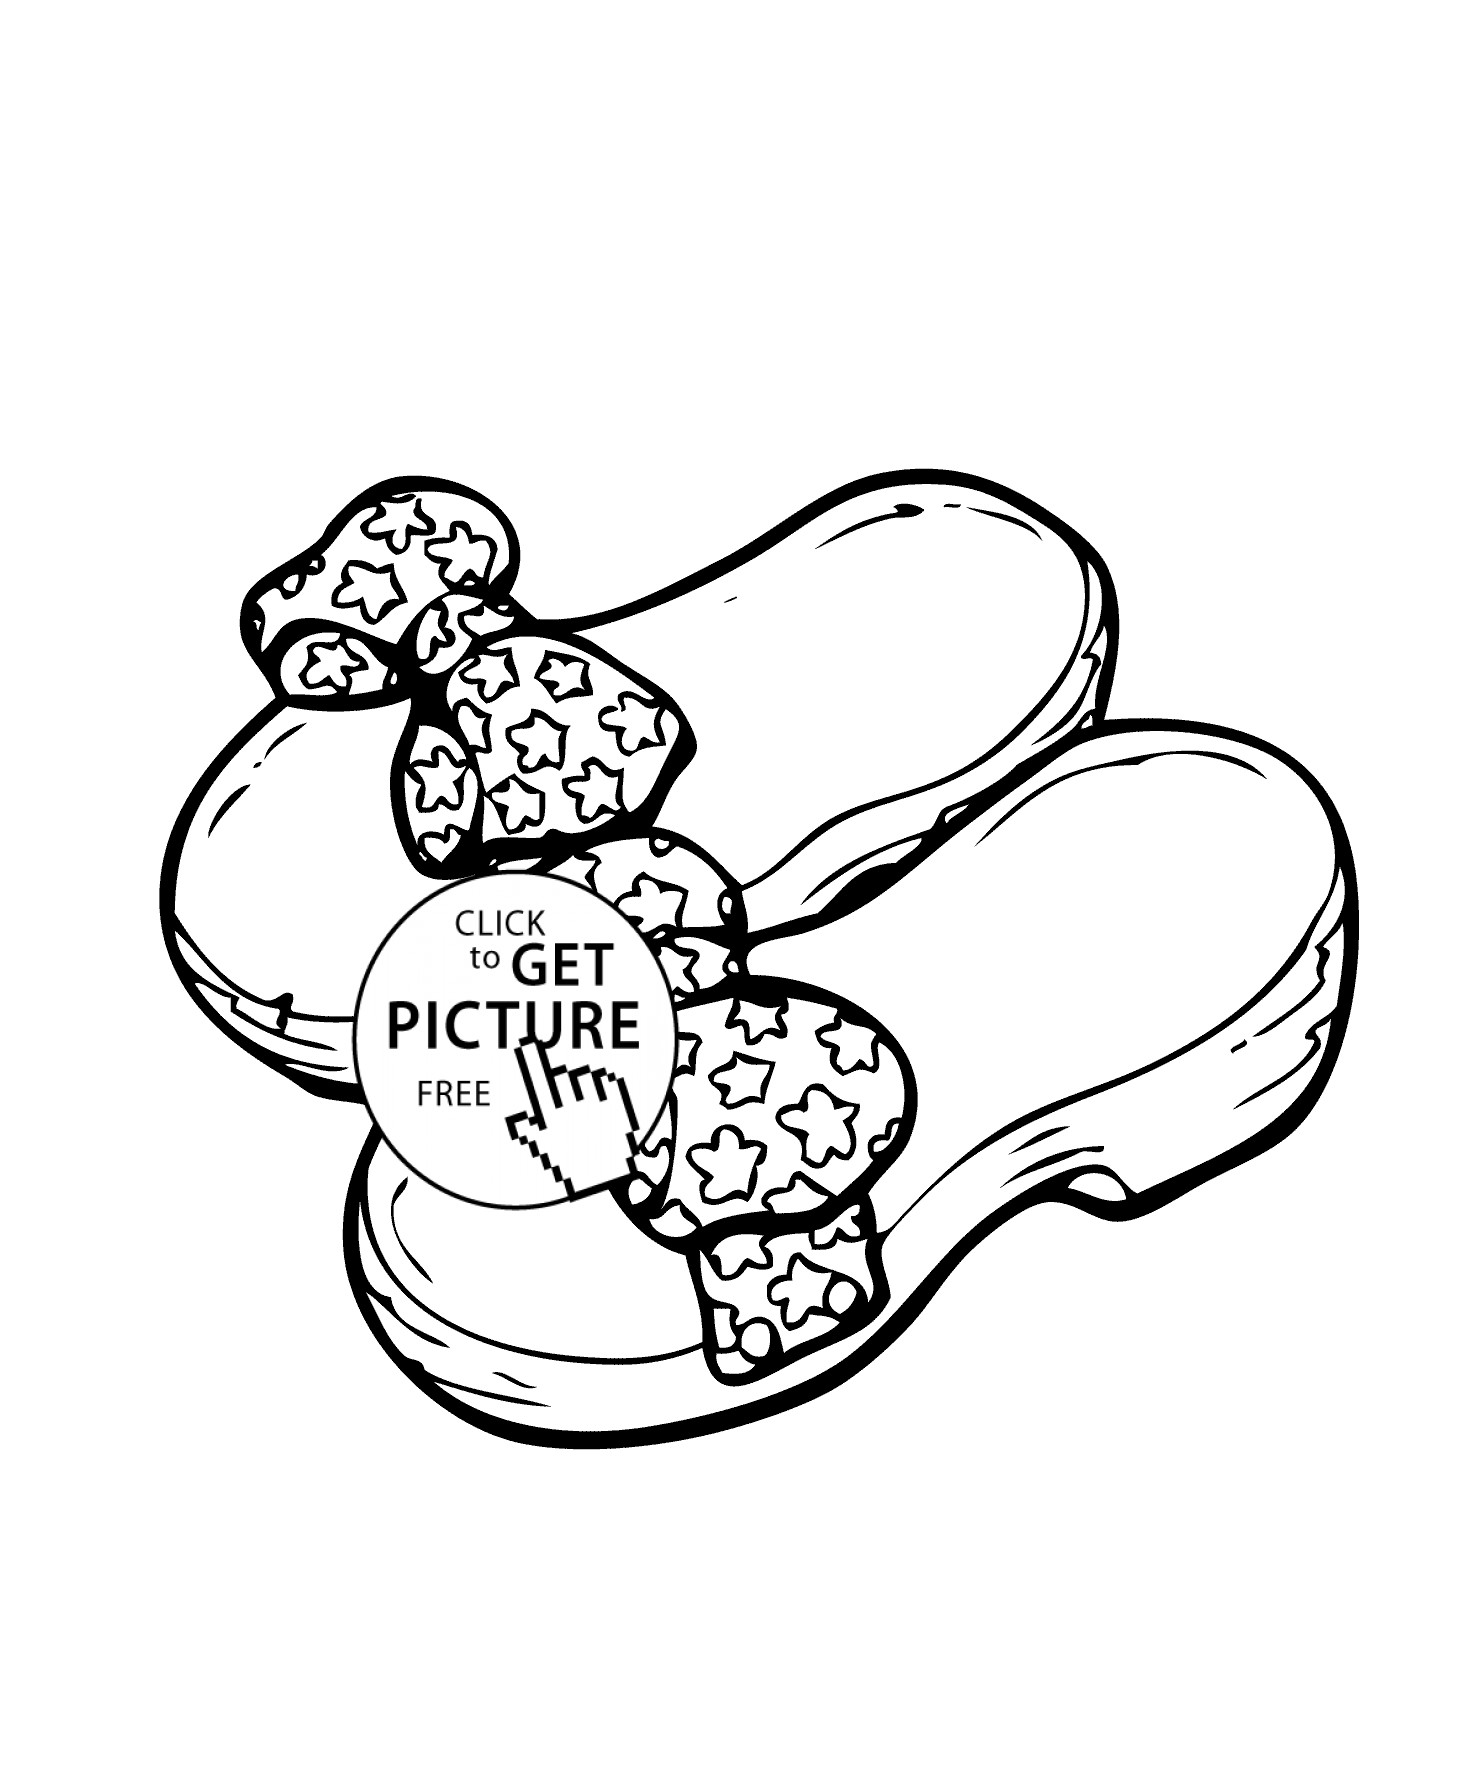 Girls Shoes Coloring Pages
 Summer shoes with bows coloring page for girls printable